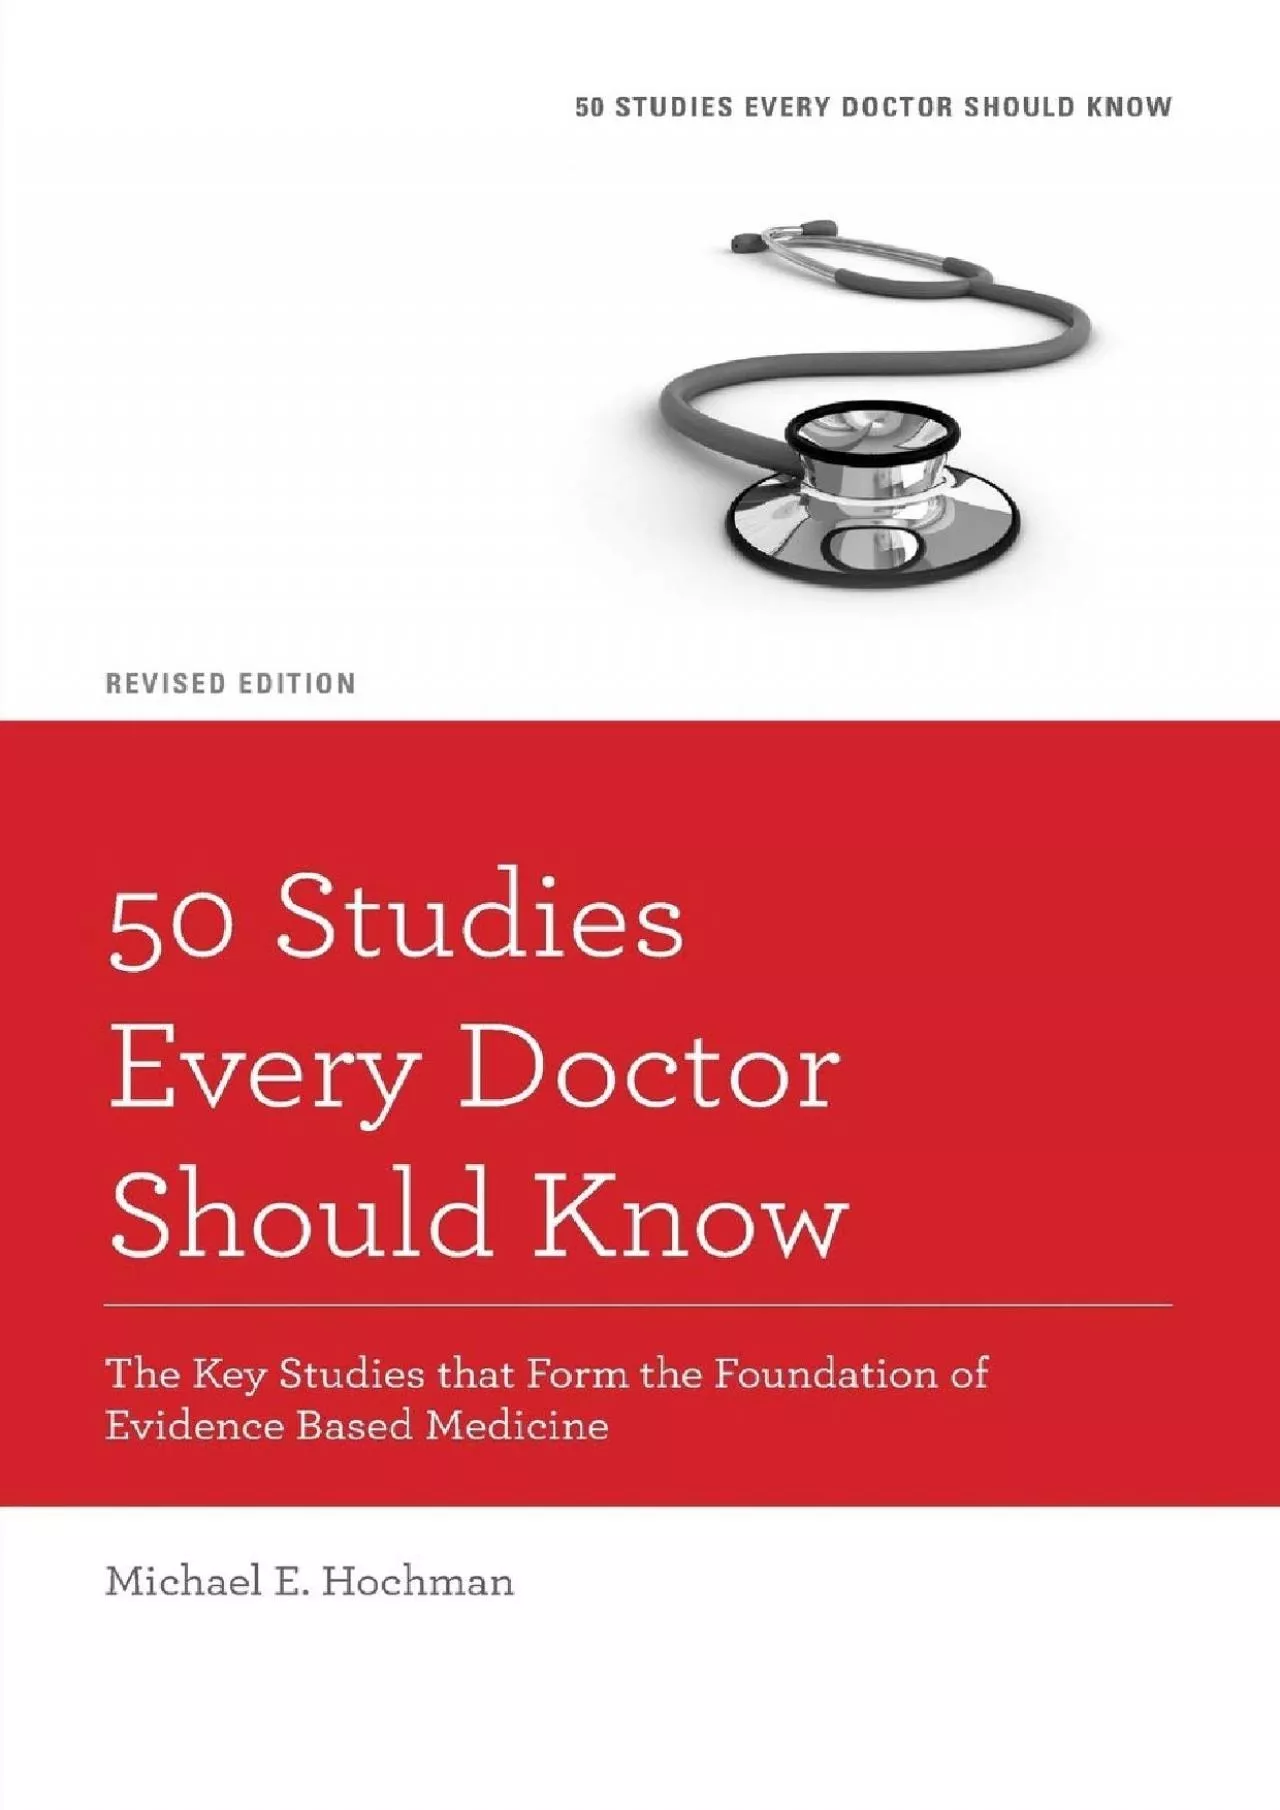 (BOOK)-50 Studies Every Doctor Should Know: The Key Studies that Form the Foundation of